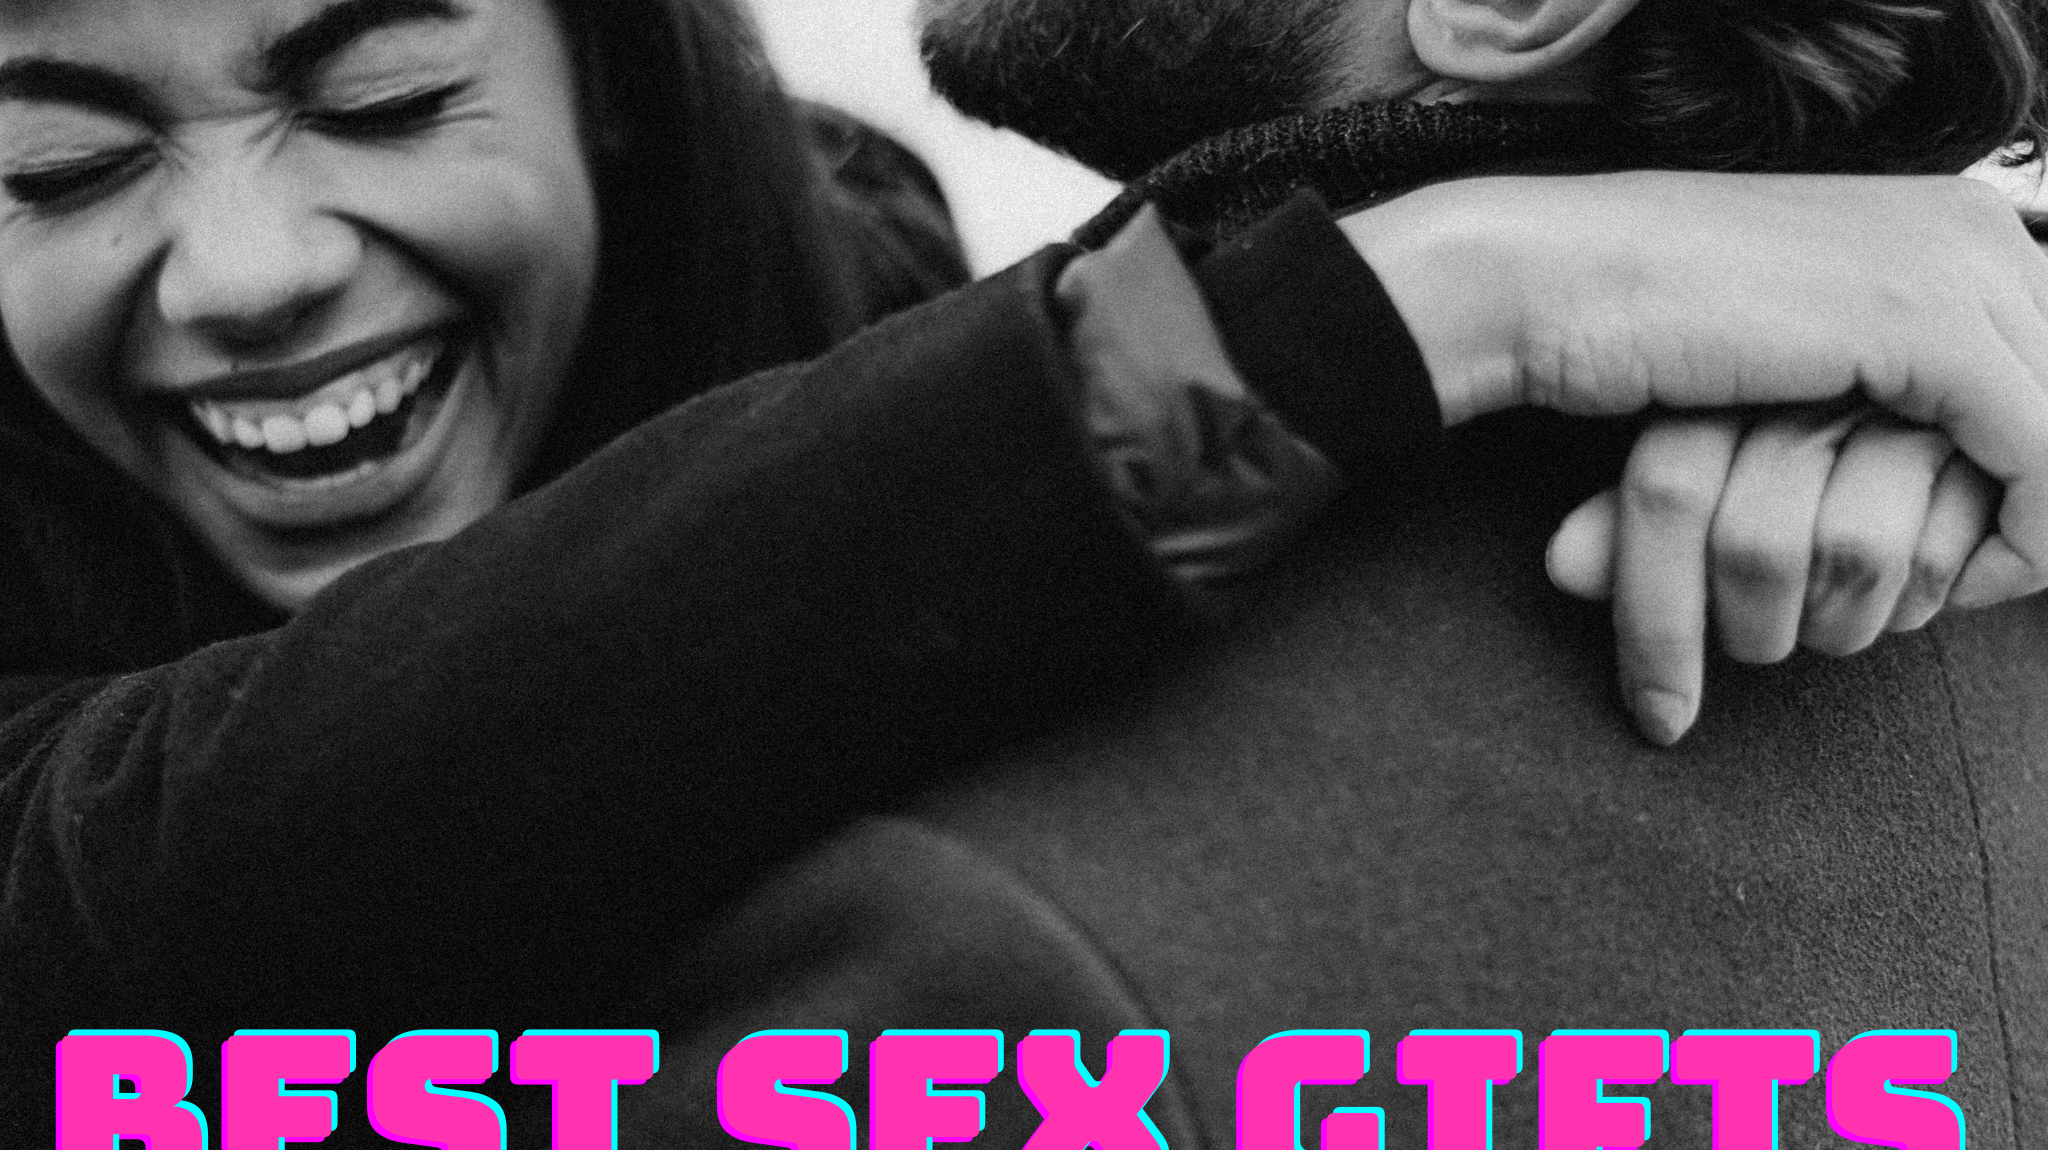 Top 10 Seductive Sex Gifts for 2024